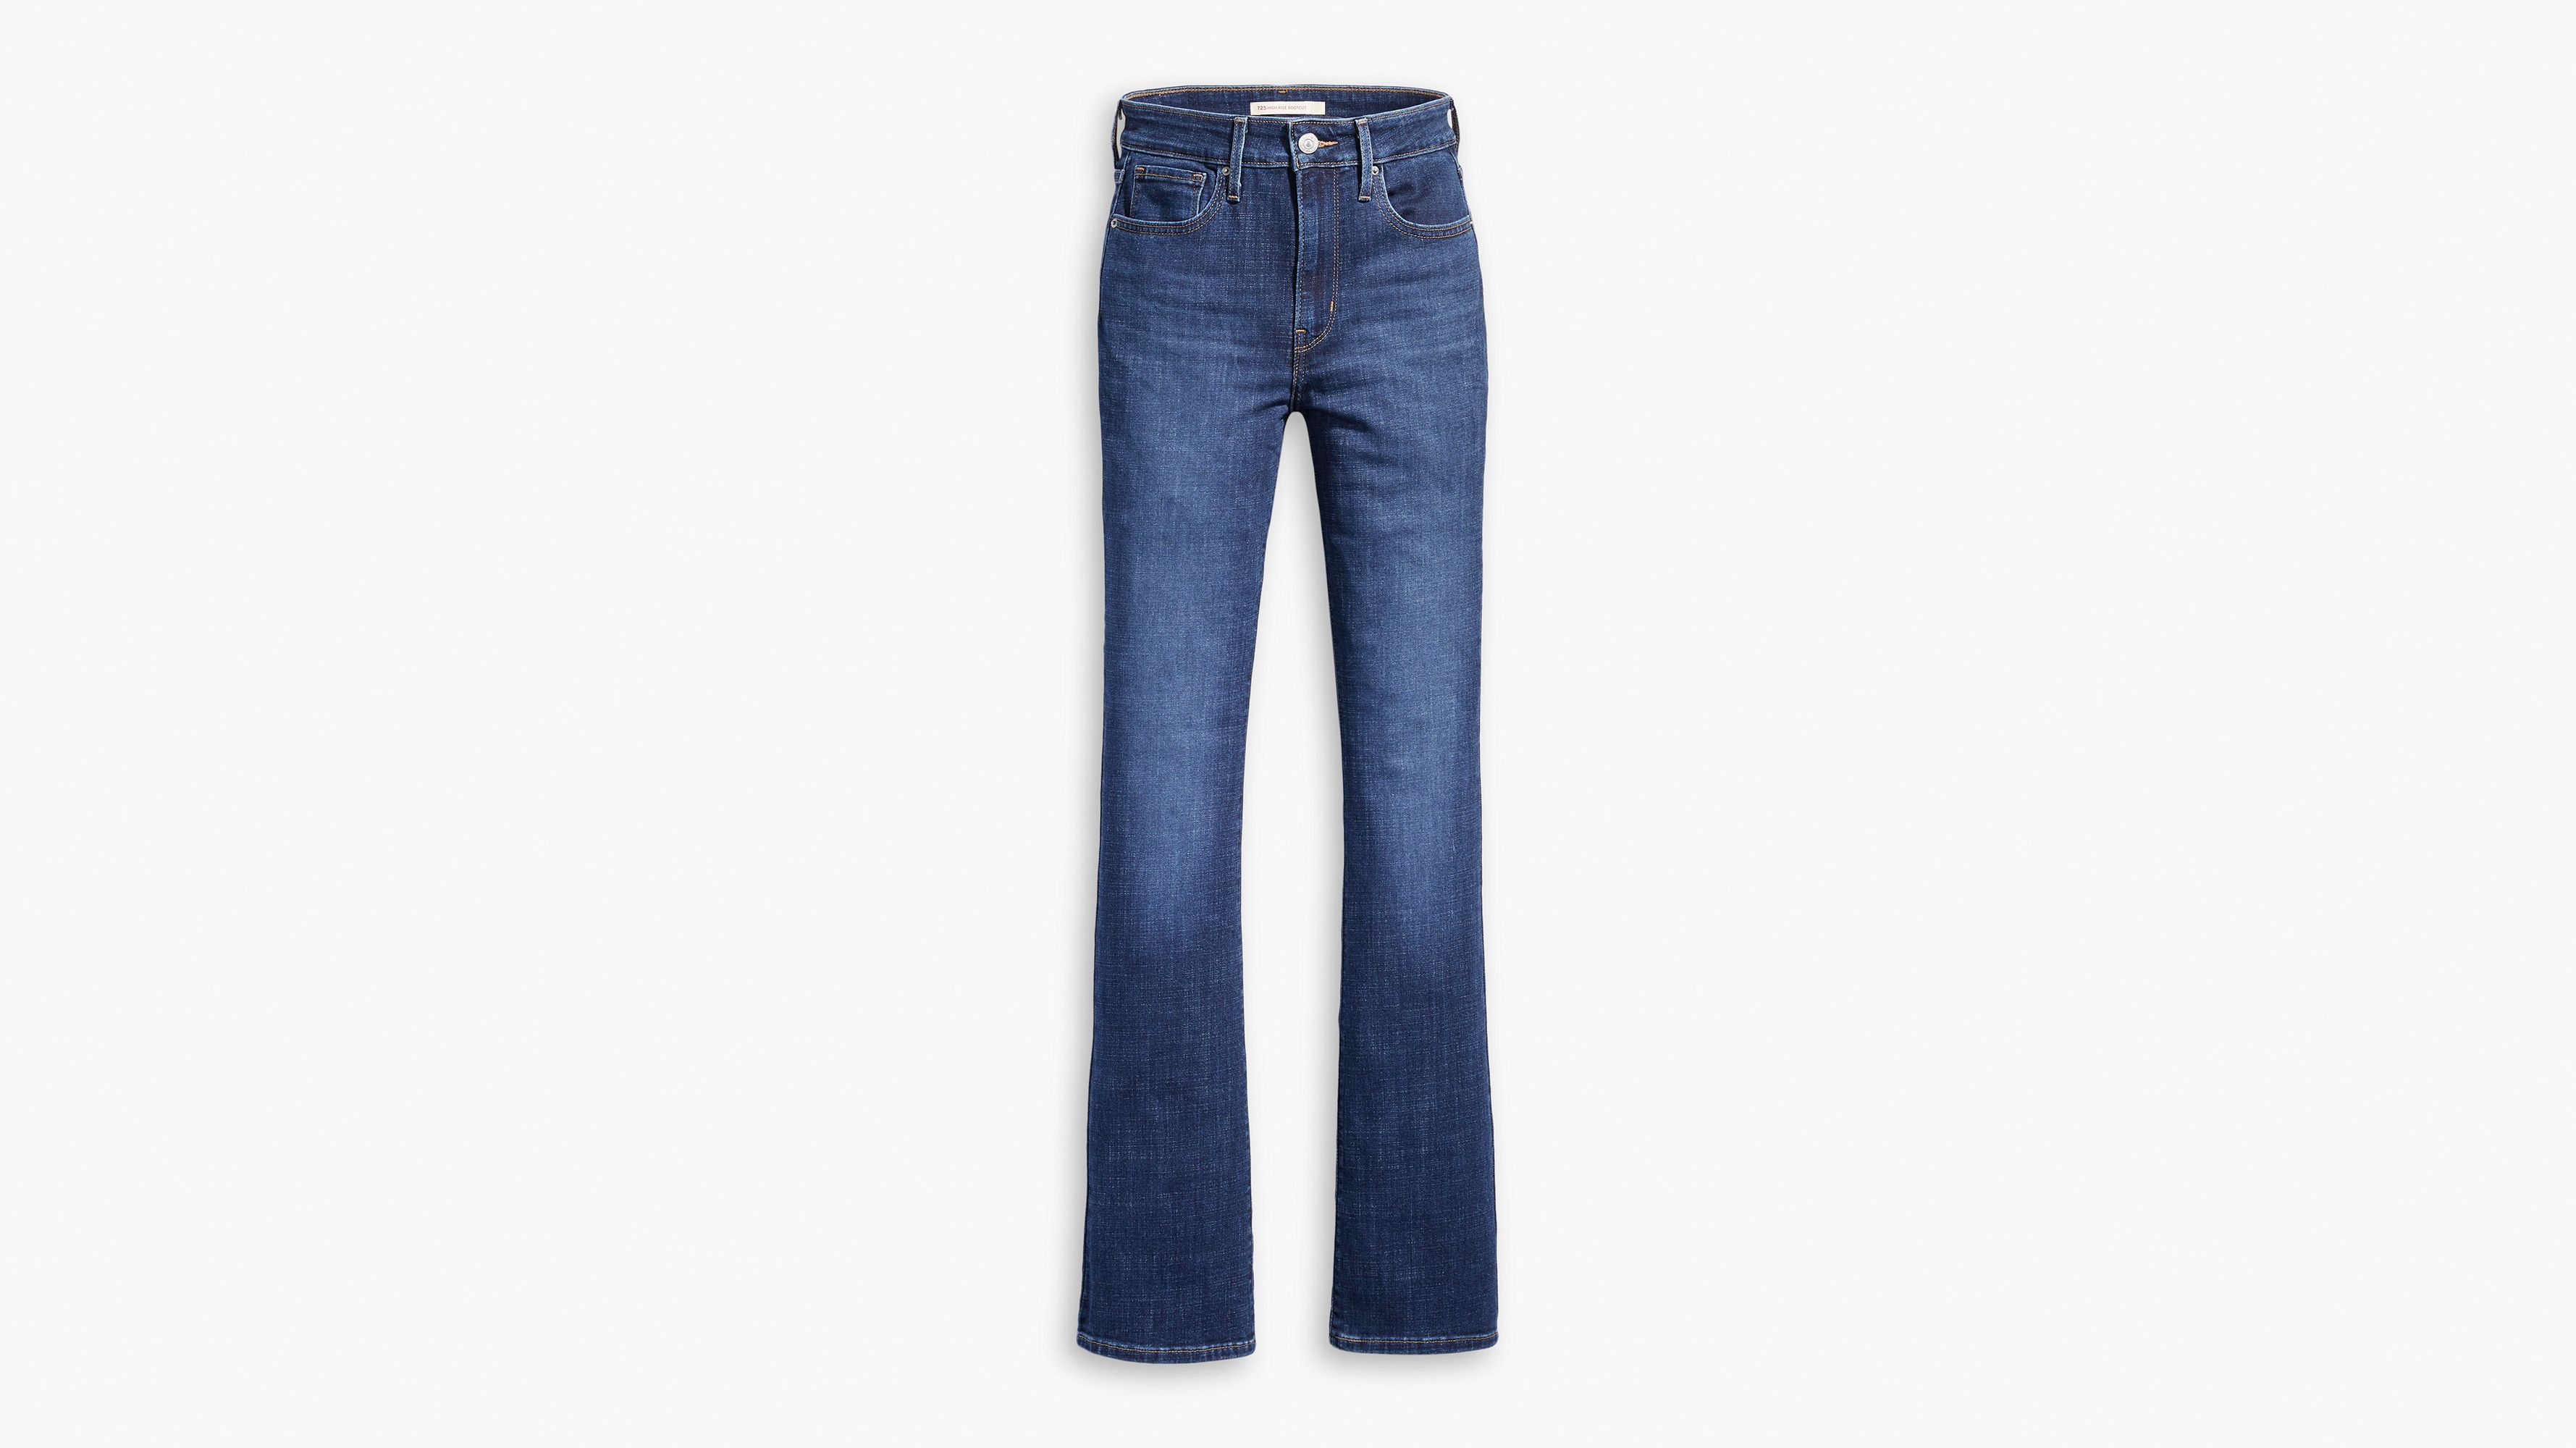 Levi's 725: Alcalas Western Wear 725 High Rise Bootcut Cast Shadows Jeans  <br> • A Leg-Lengthening Bootcut Silhouette <br> • Designed To Give You  Legs For Days <br> • Fits Slim Through